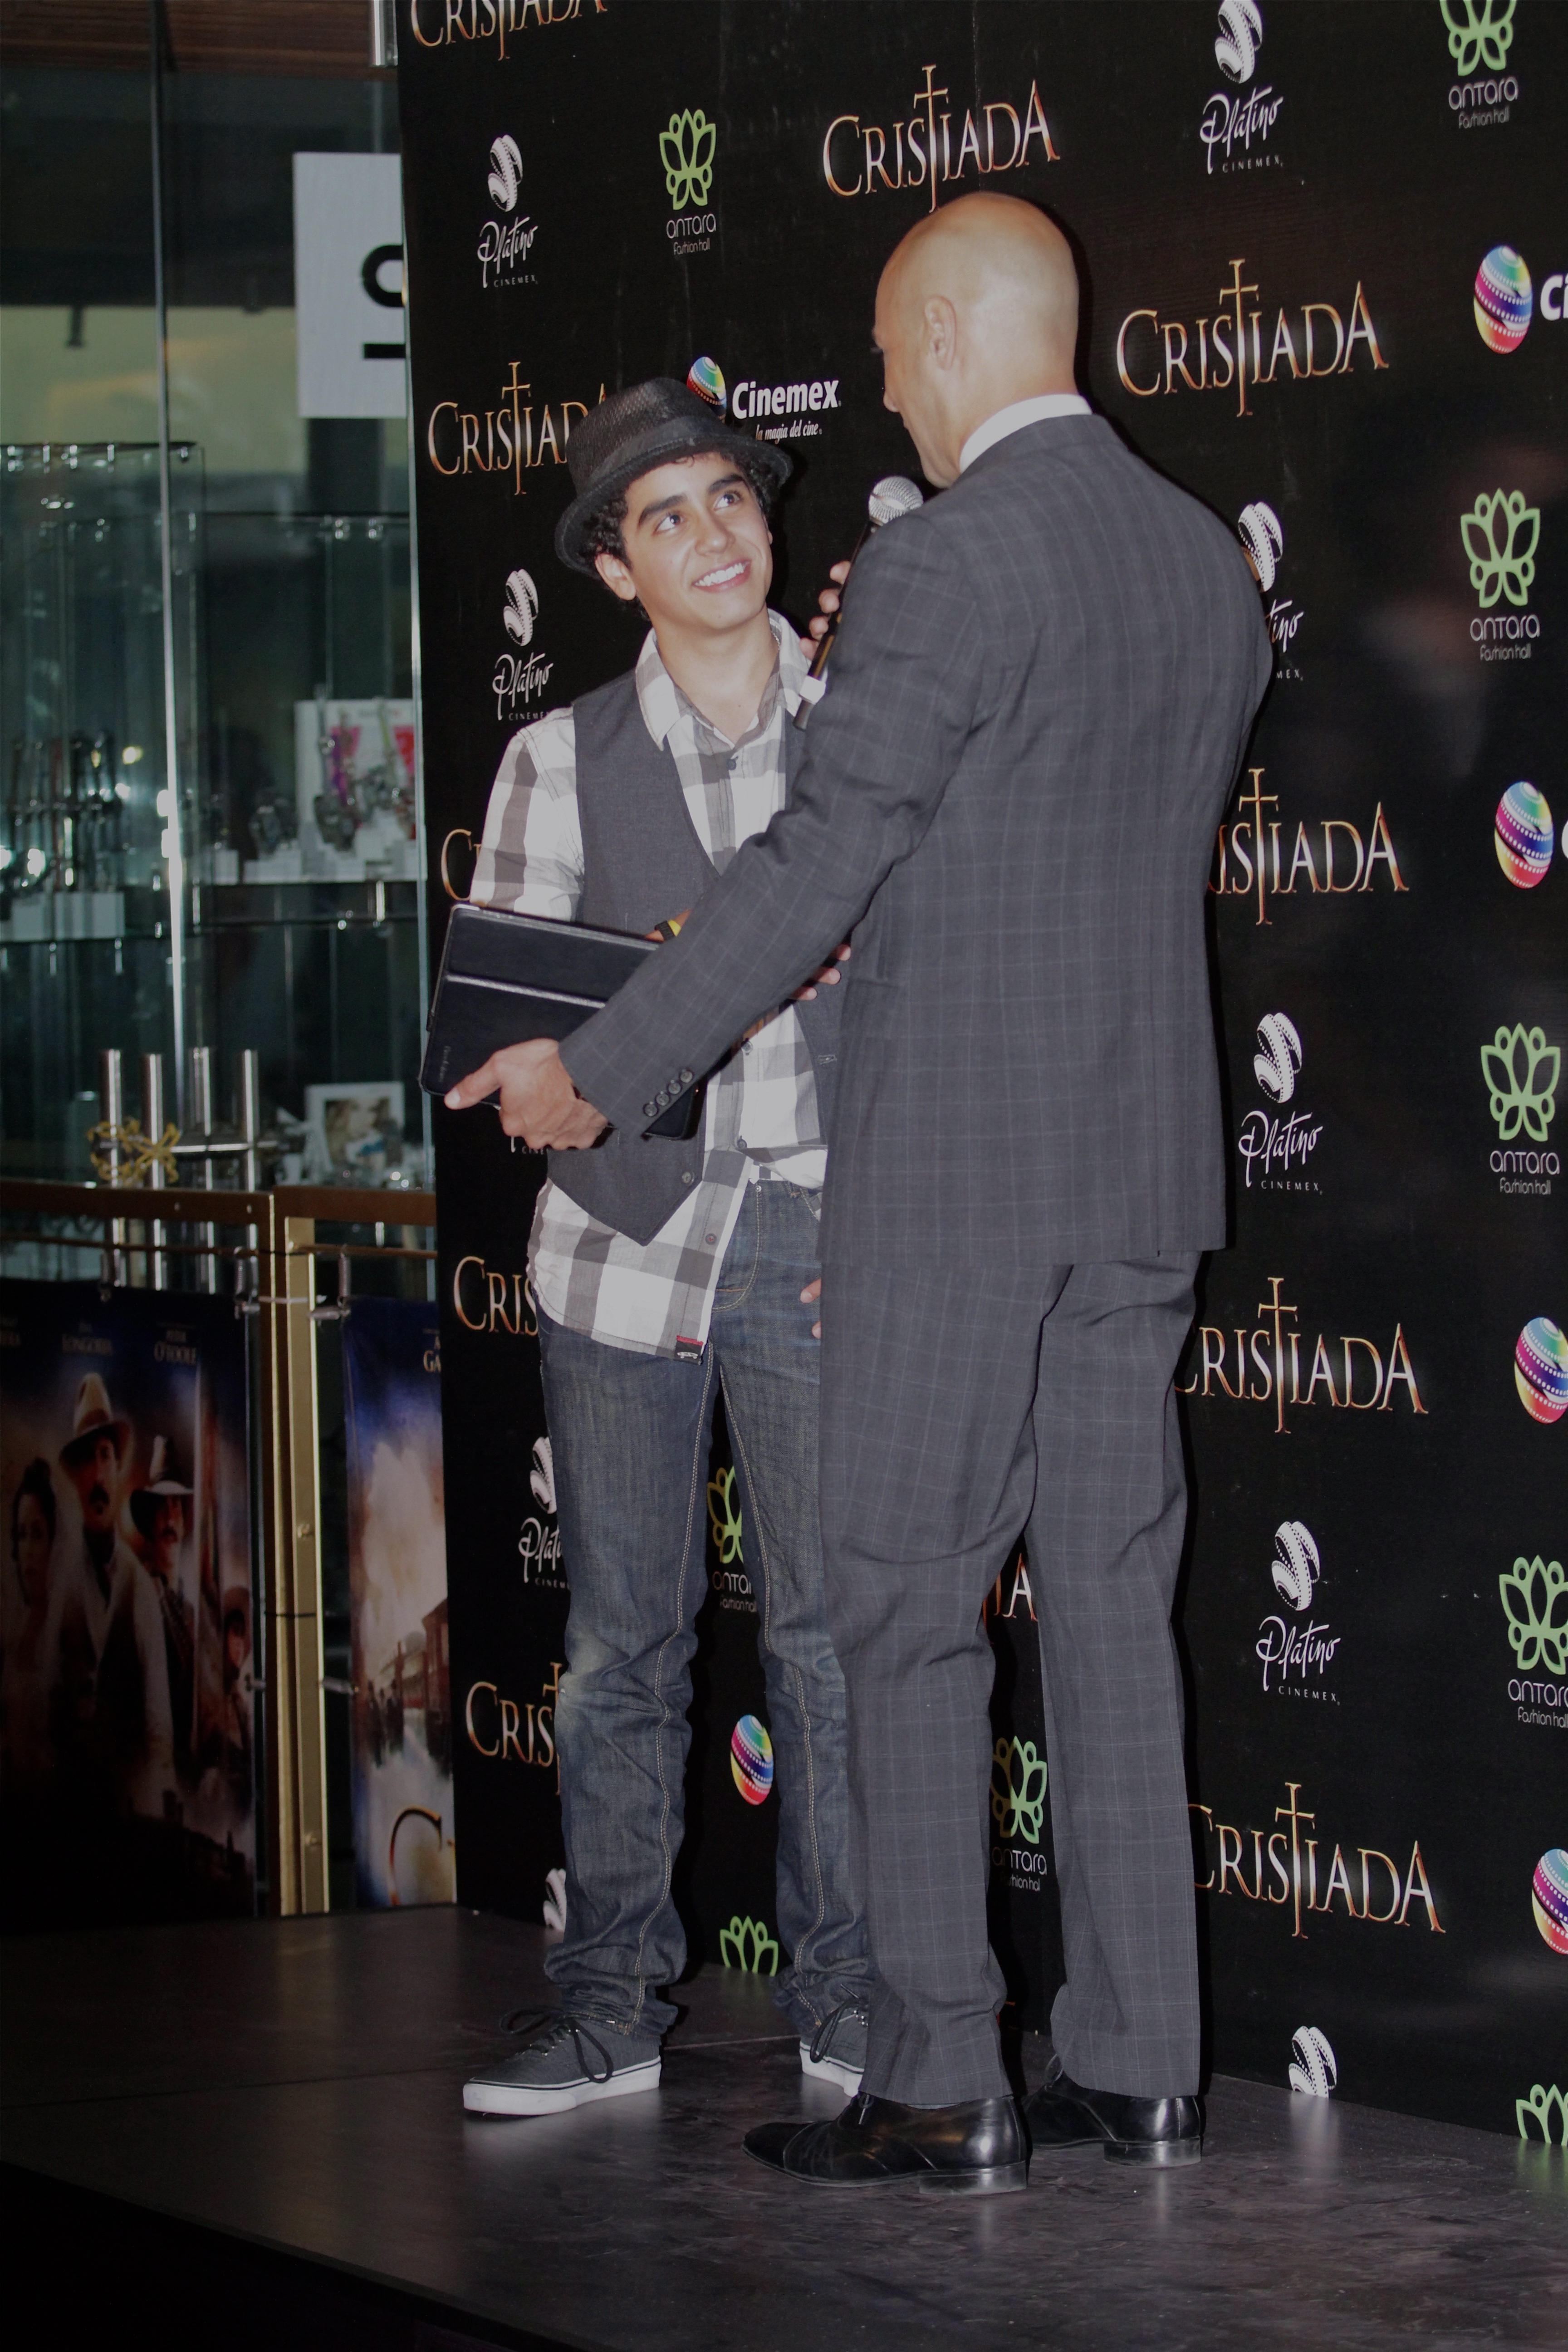 Mauricio having an interview with Javier Poza at the Red Carpet of For Greater Glory in Mexico.